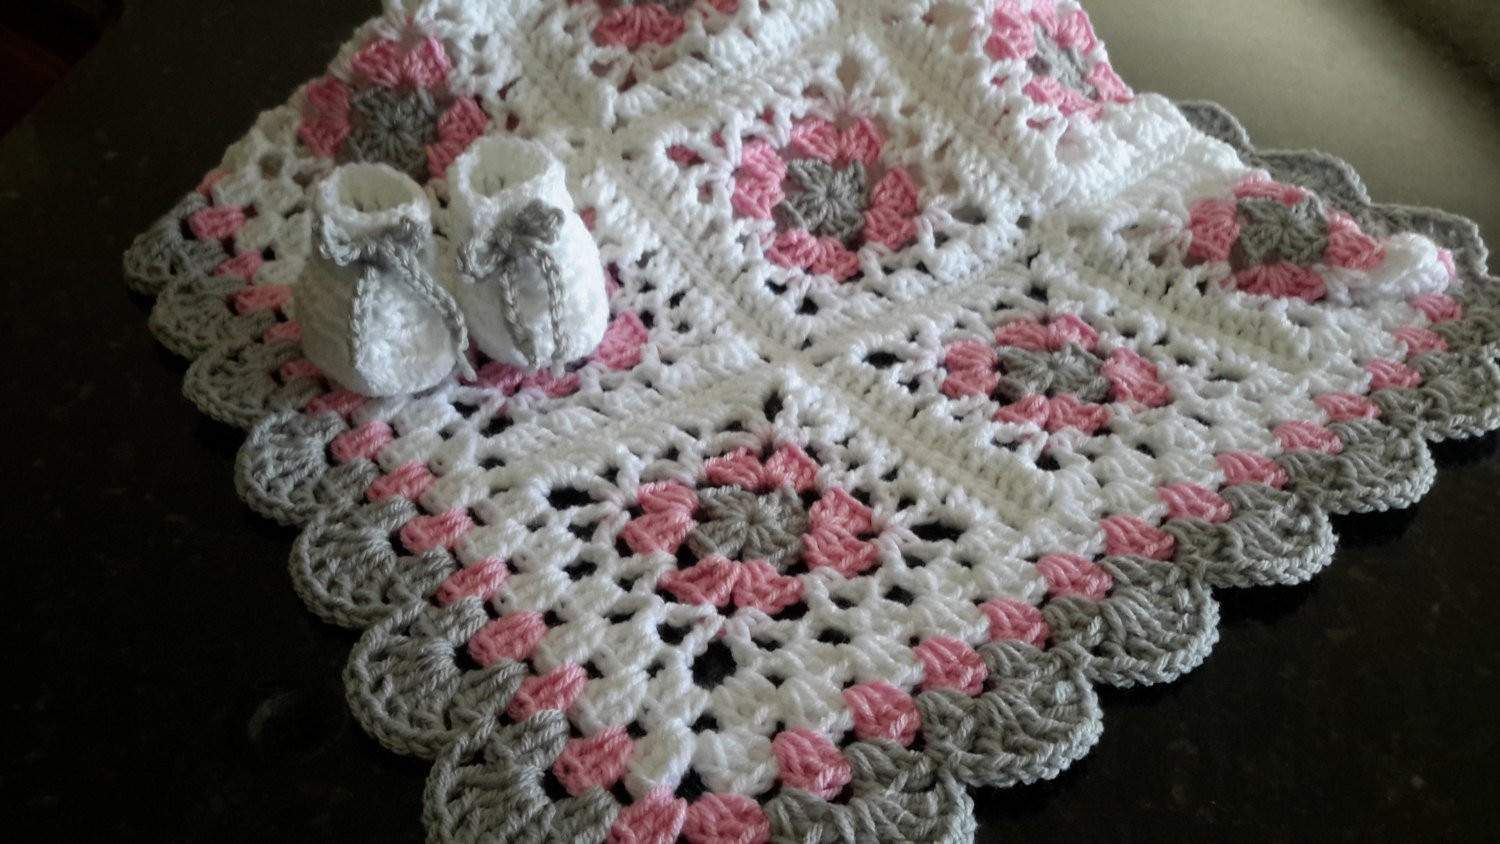 Continuous granny square afghan pattern